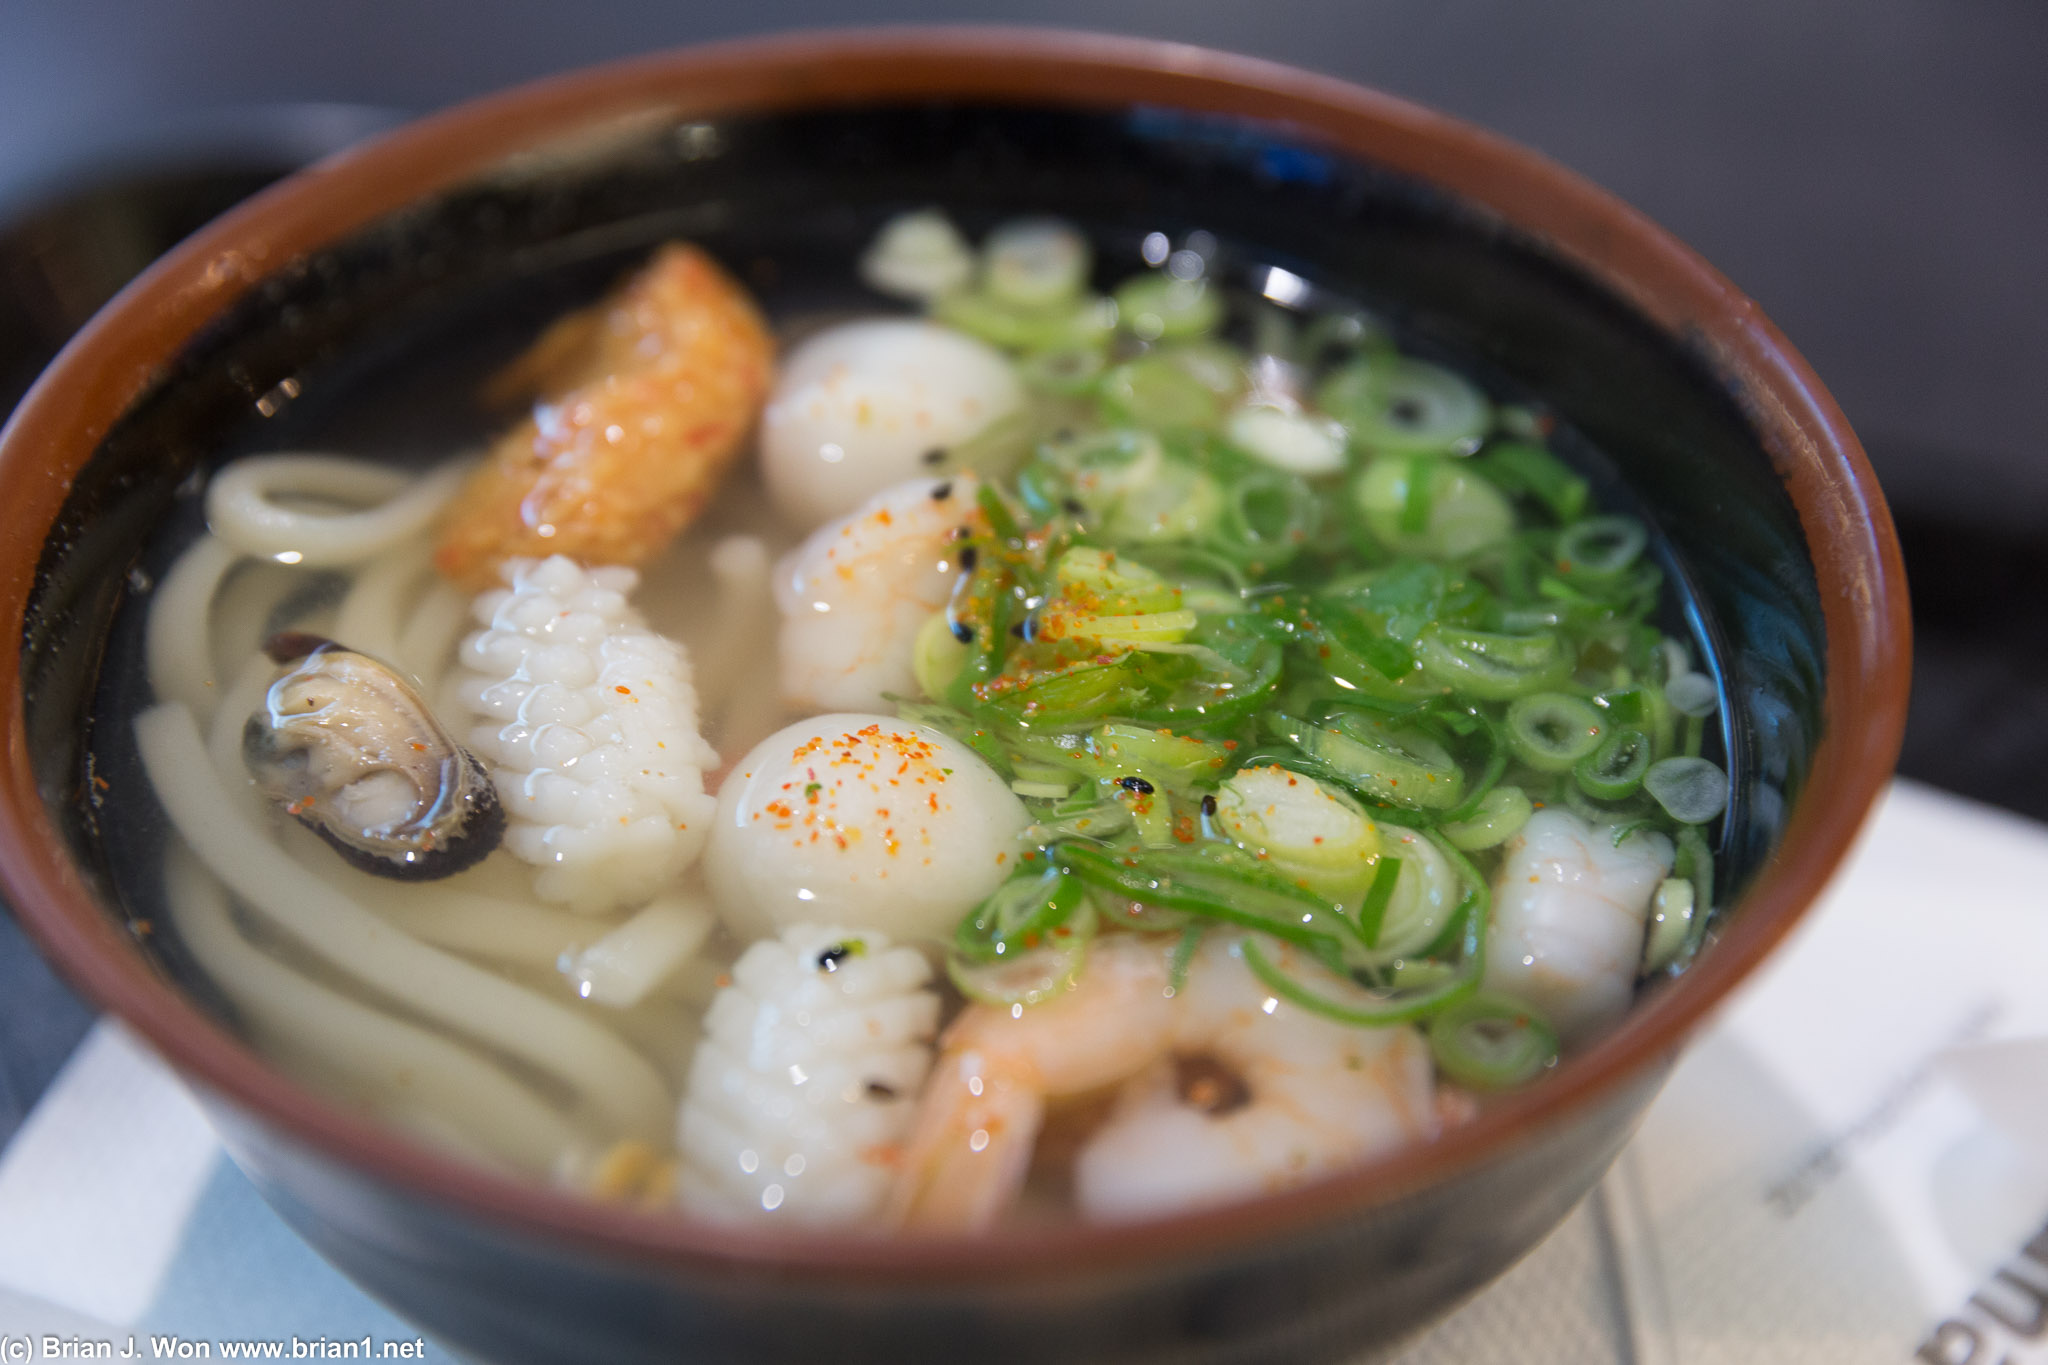 Seafood udon at Auckland Airport. Edible. For airport food.